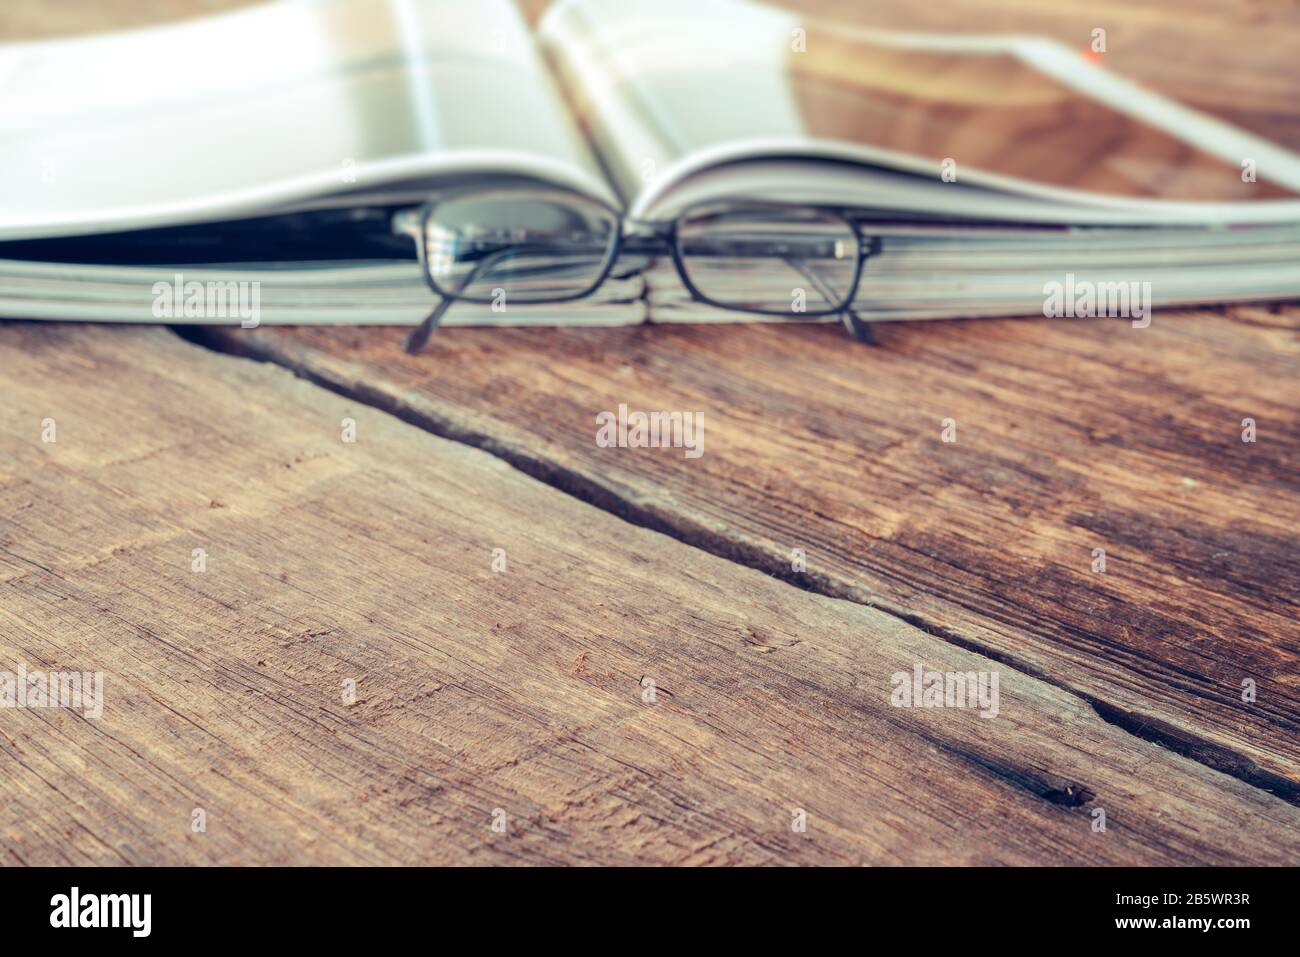 View of magazine or katalog ready to read with glasses on wooden table. Background textures concept Stock Photo